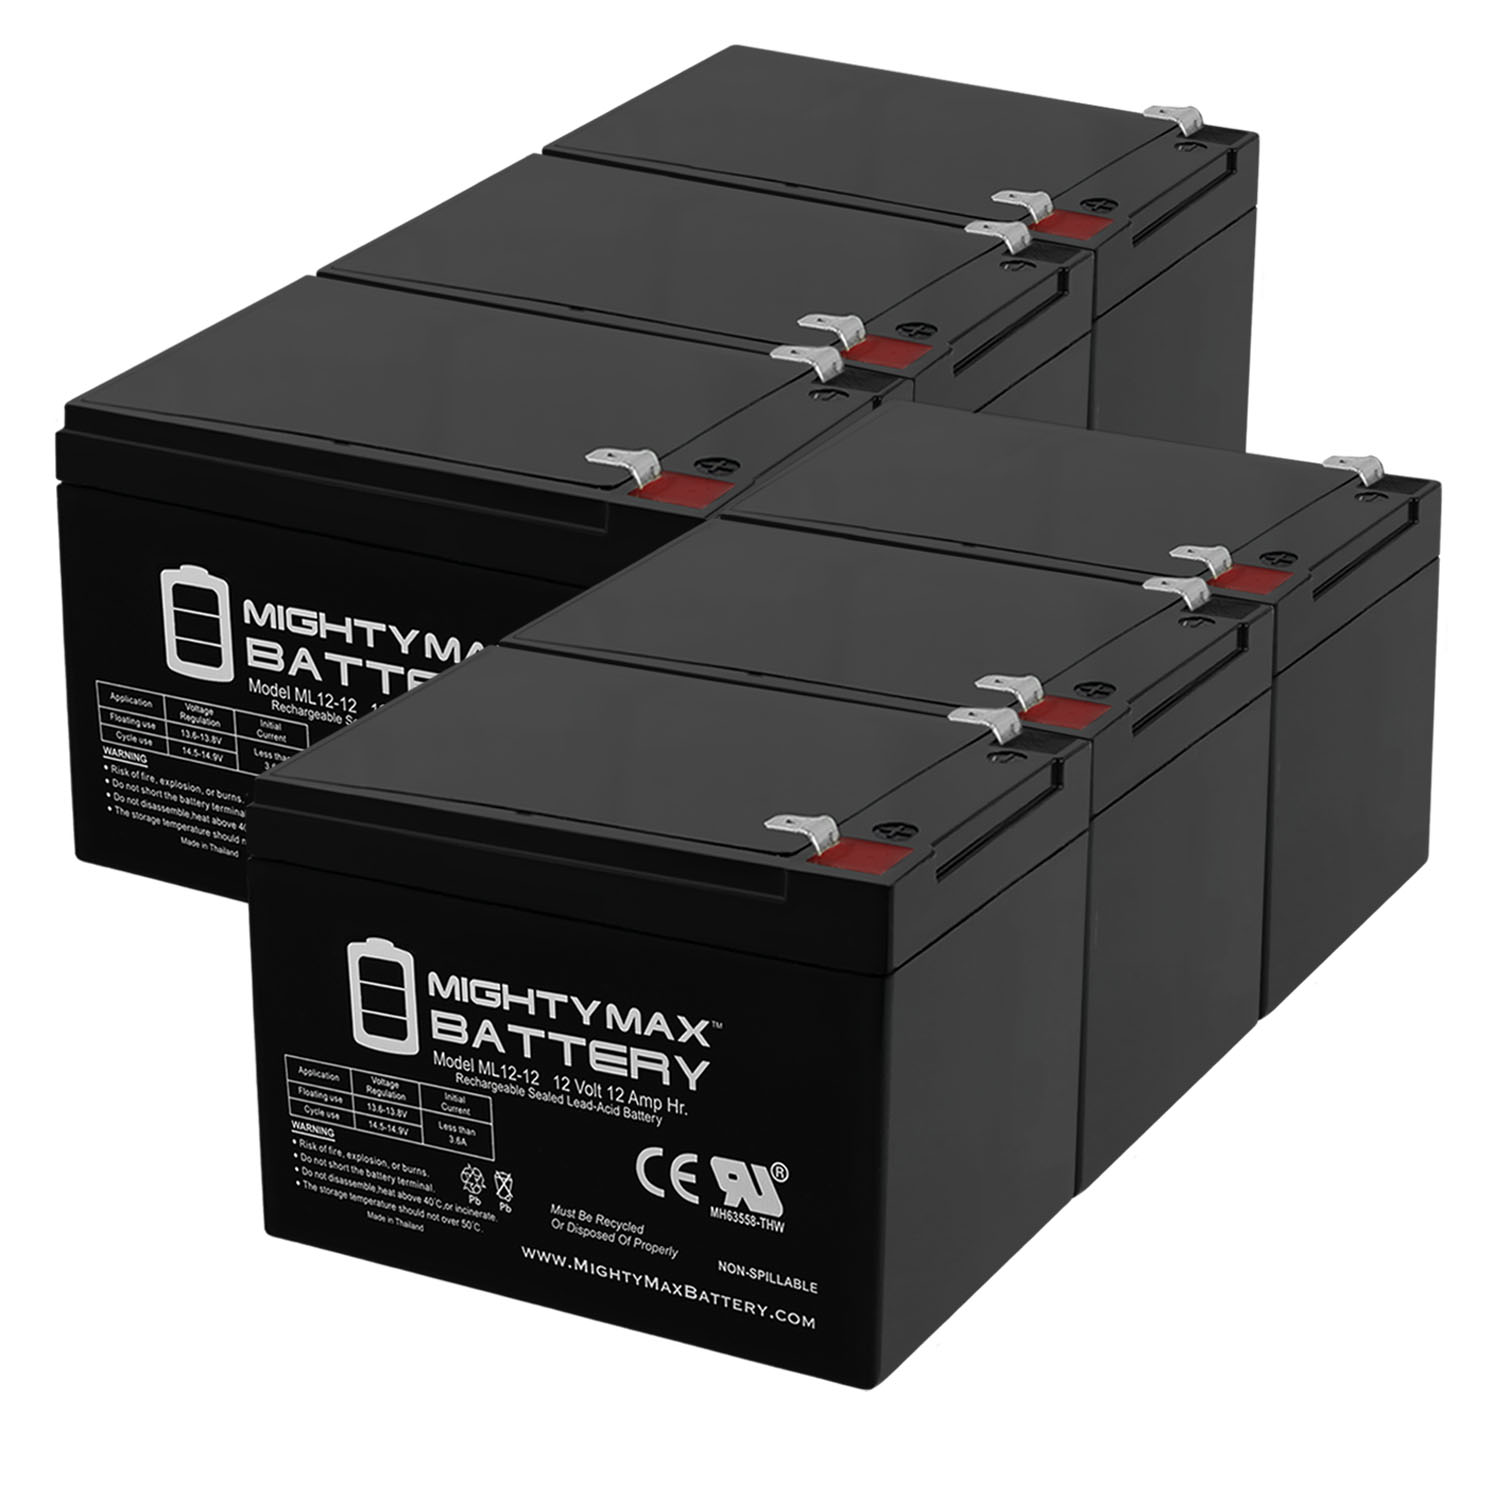 ML12-12 - 12V 12AH F2 Replacement Battery compatible with Belkin Regulator Pro Net 700 - 6 Pack